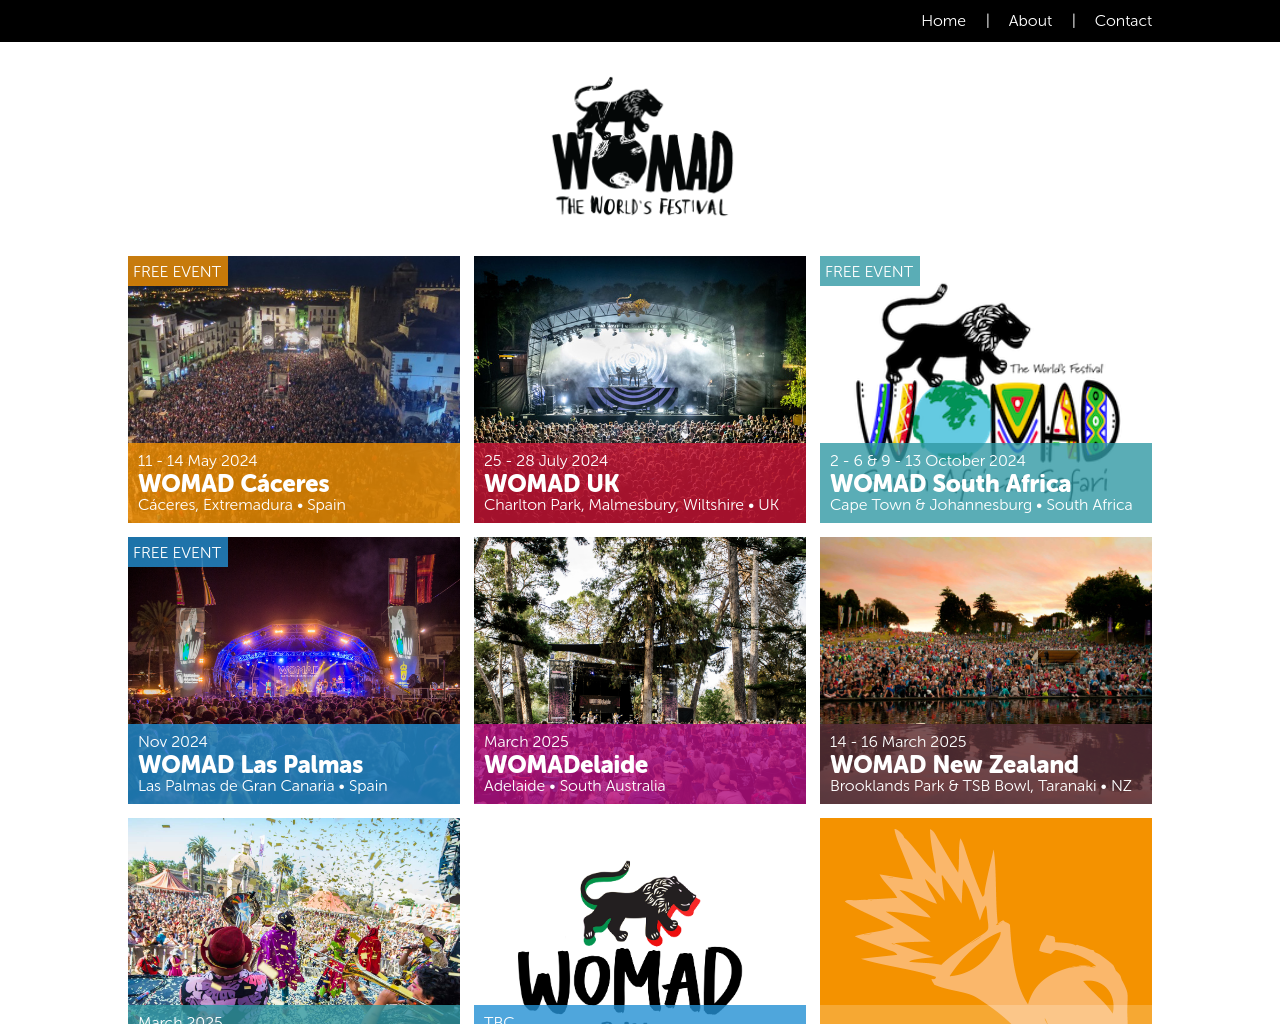 womad.org